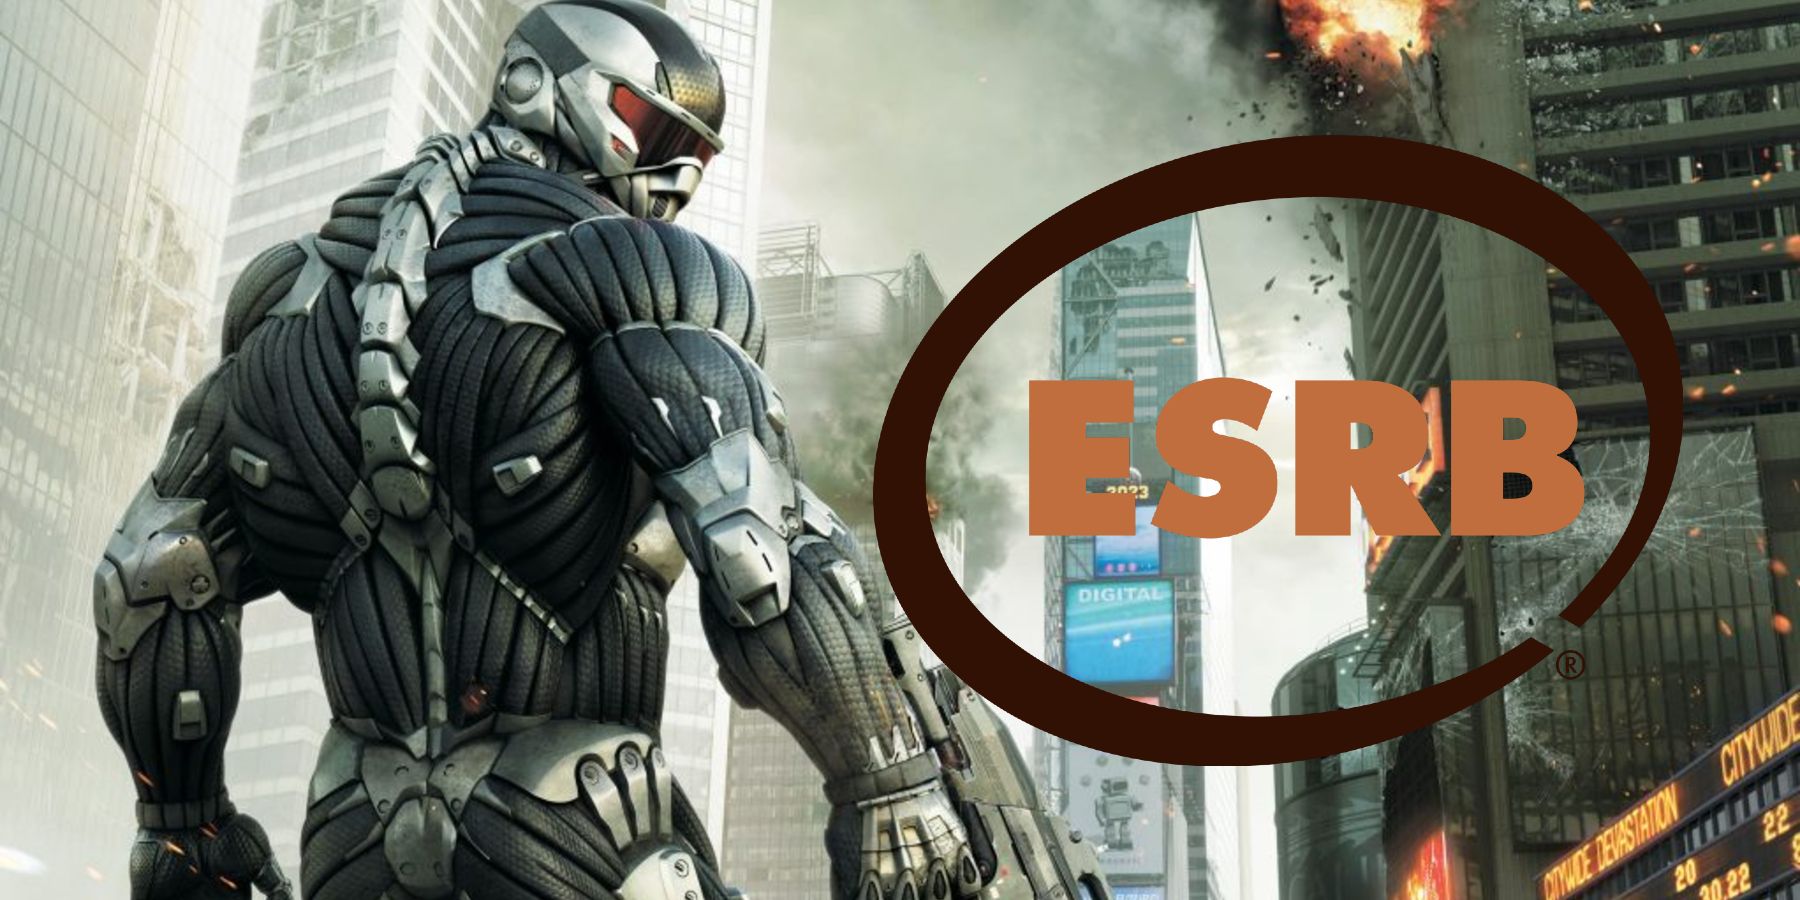 crysis remaster trilogy image of crysis 2 prophet with esrb logo feature